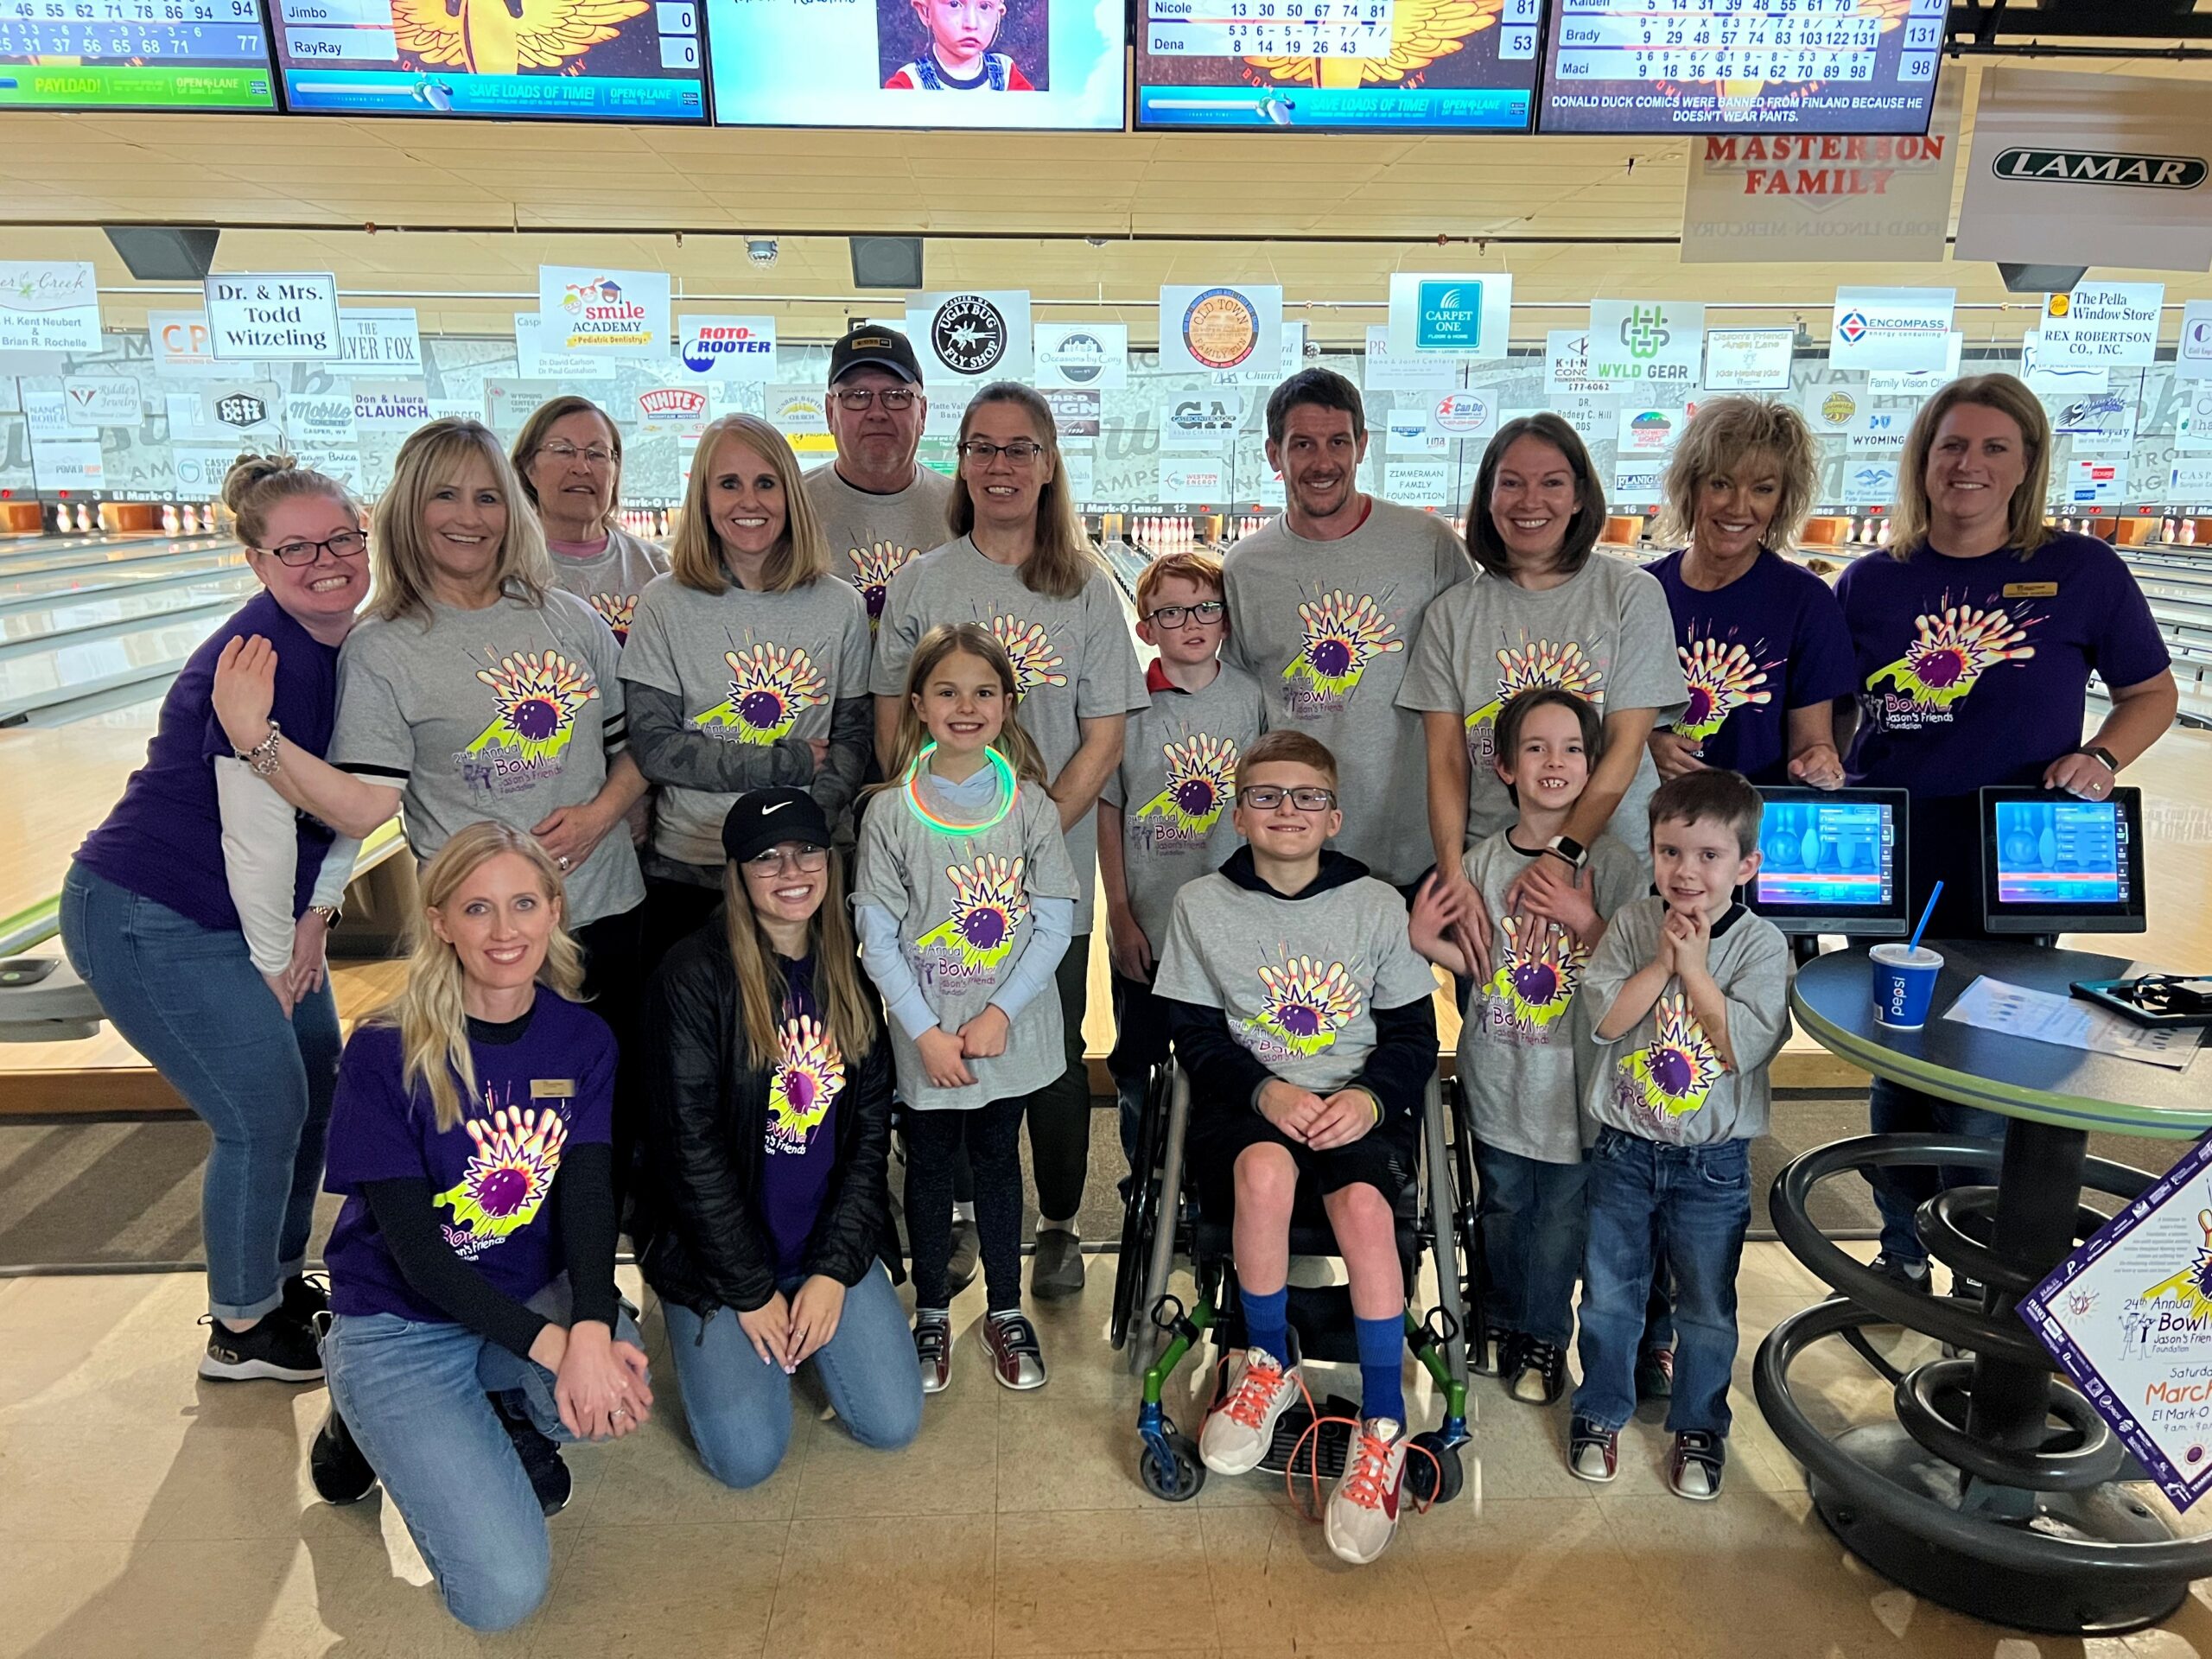 Jasons Friends Assisting Over 150 Wyoming Families As 25th Annual Bowl Fundraiser Approaches